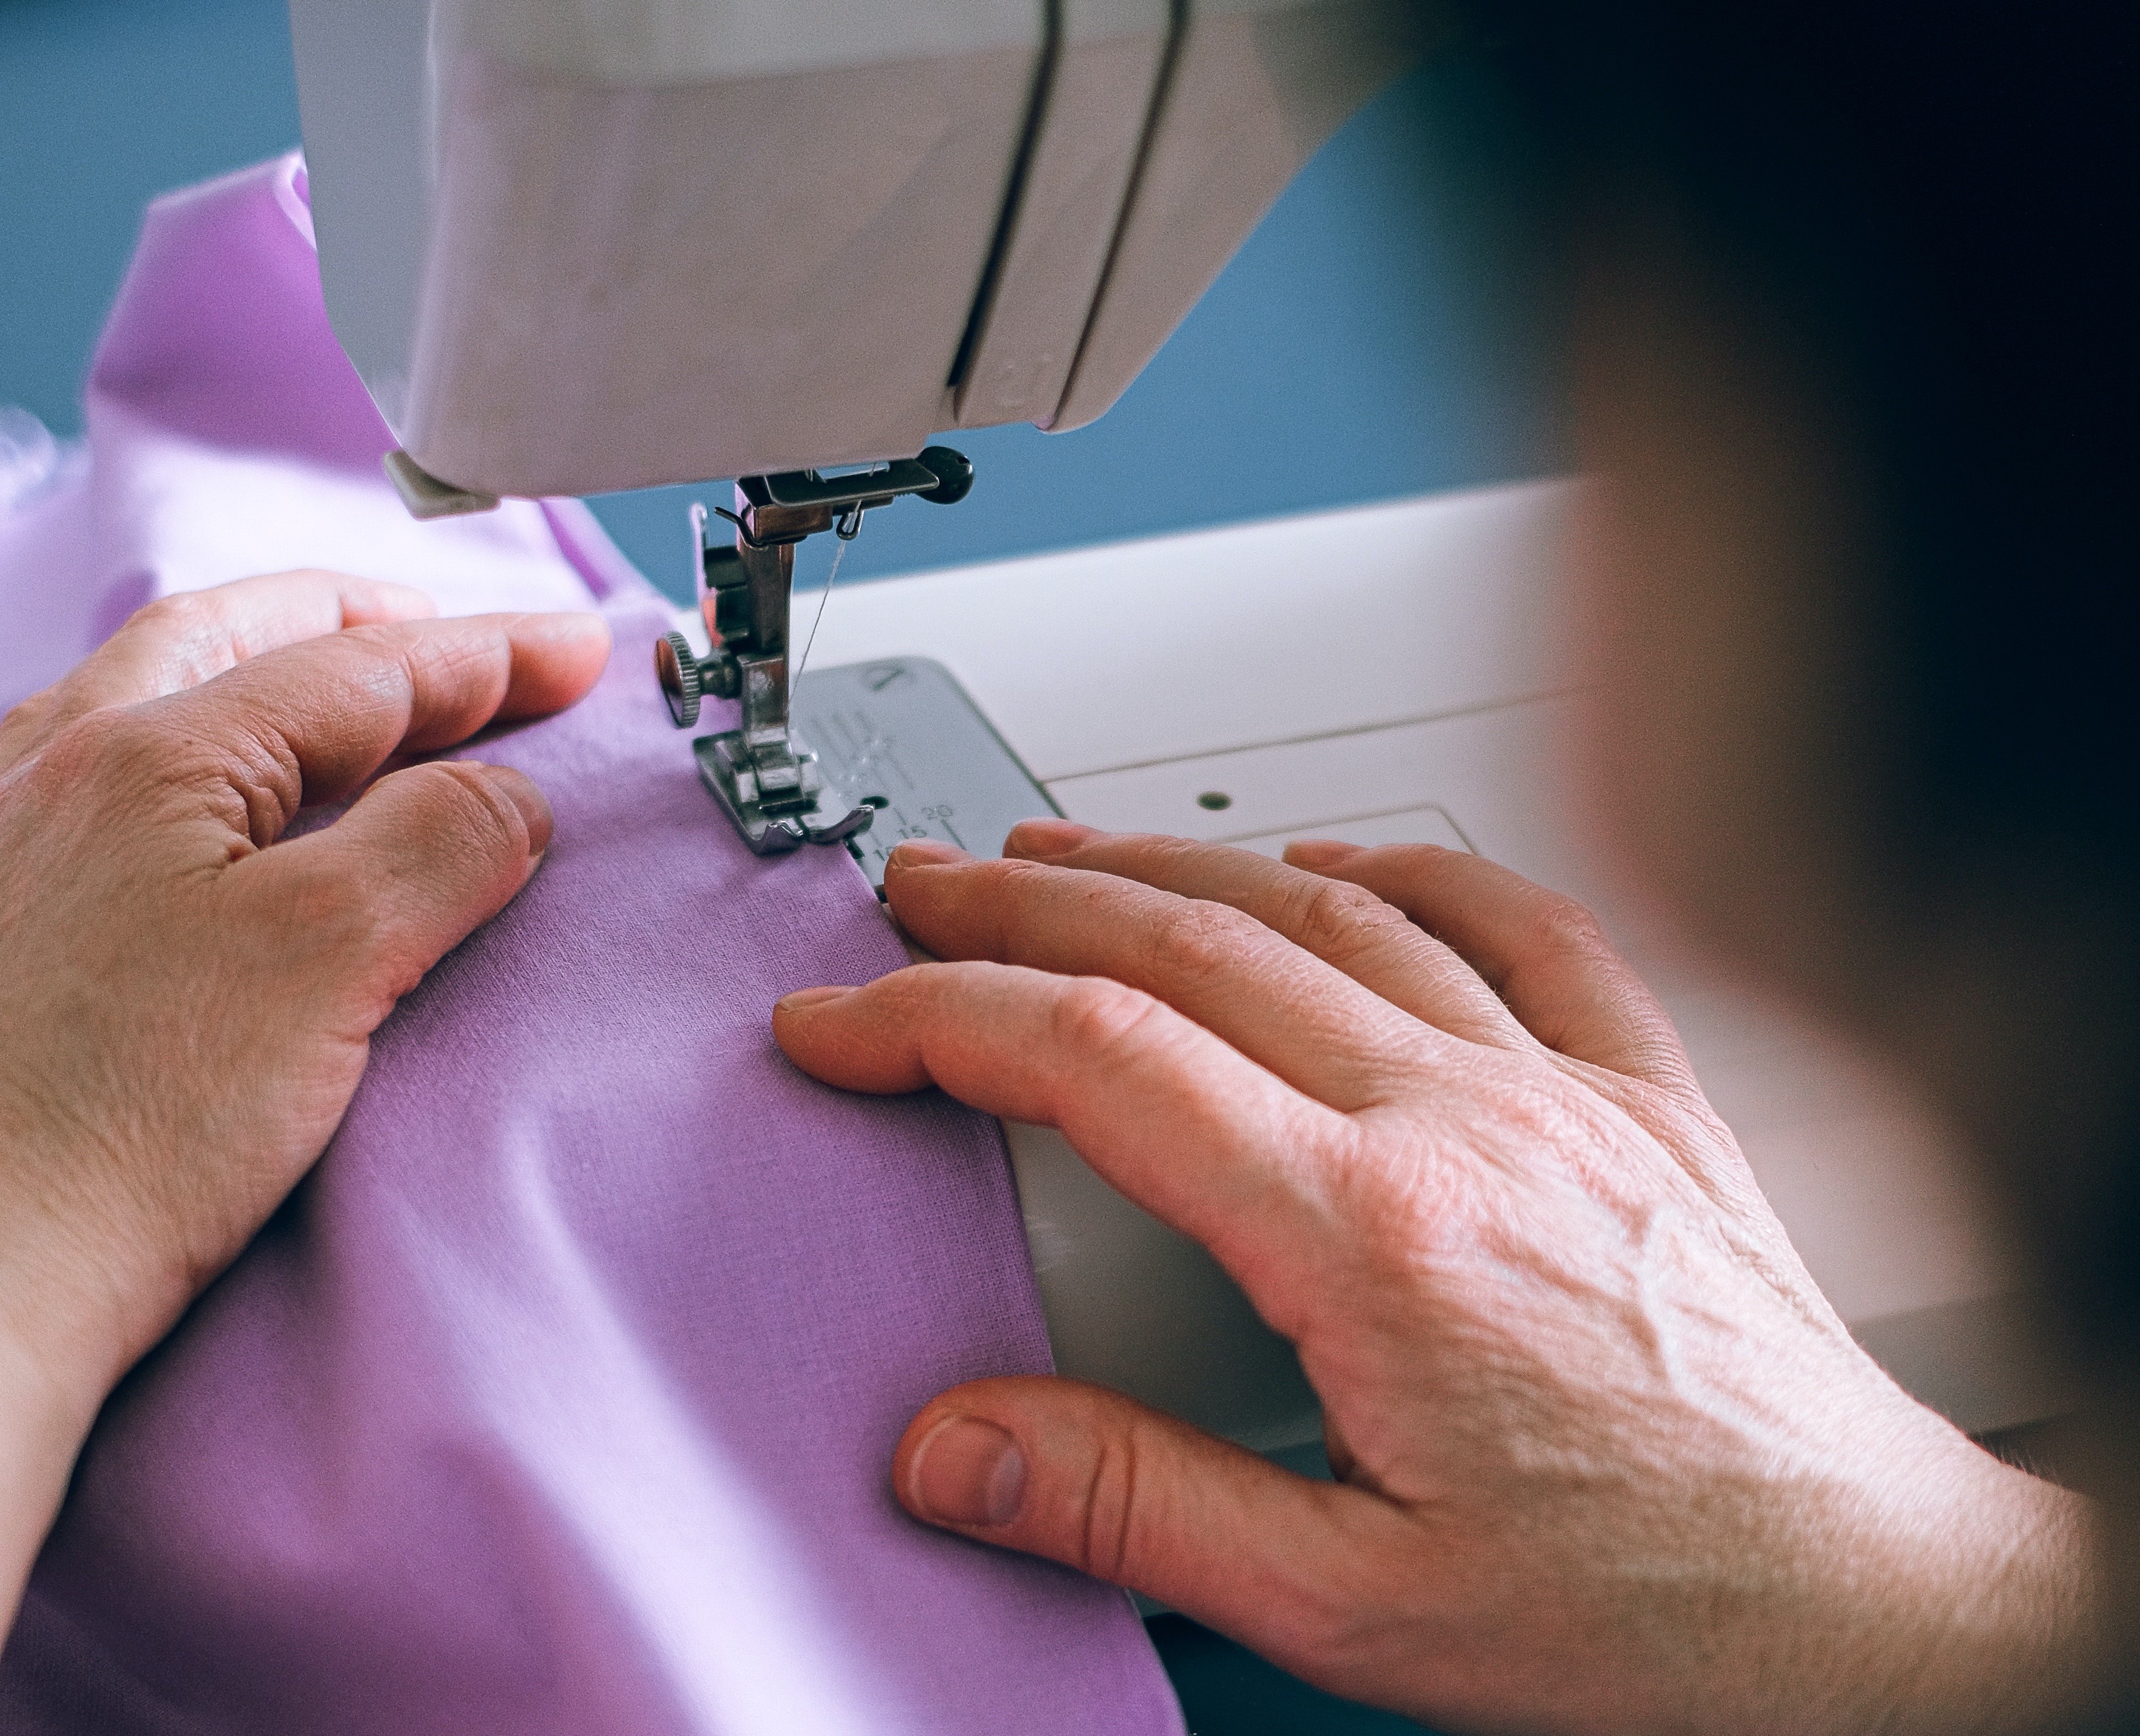 Macy was shocked when she saw her granny making three smaller coats from her new coat. | Source: Pexels